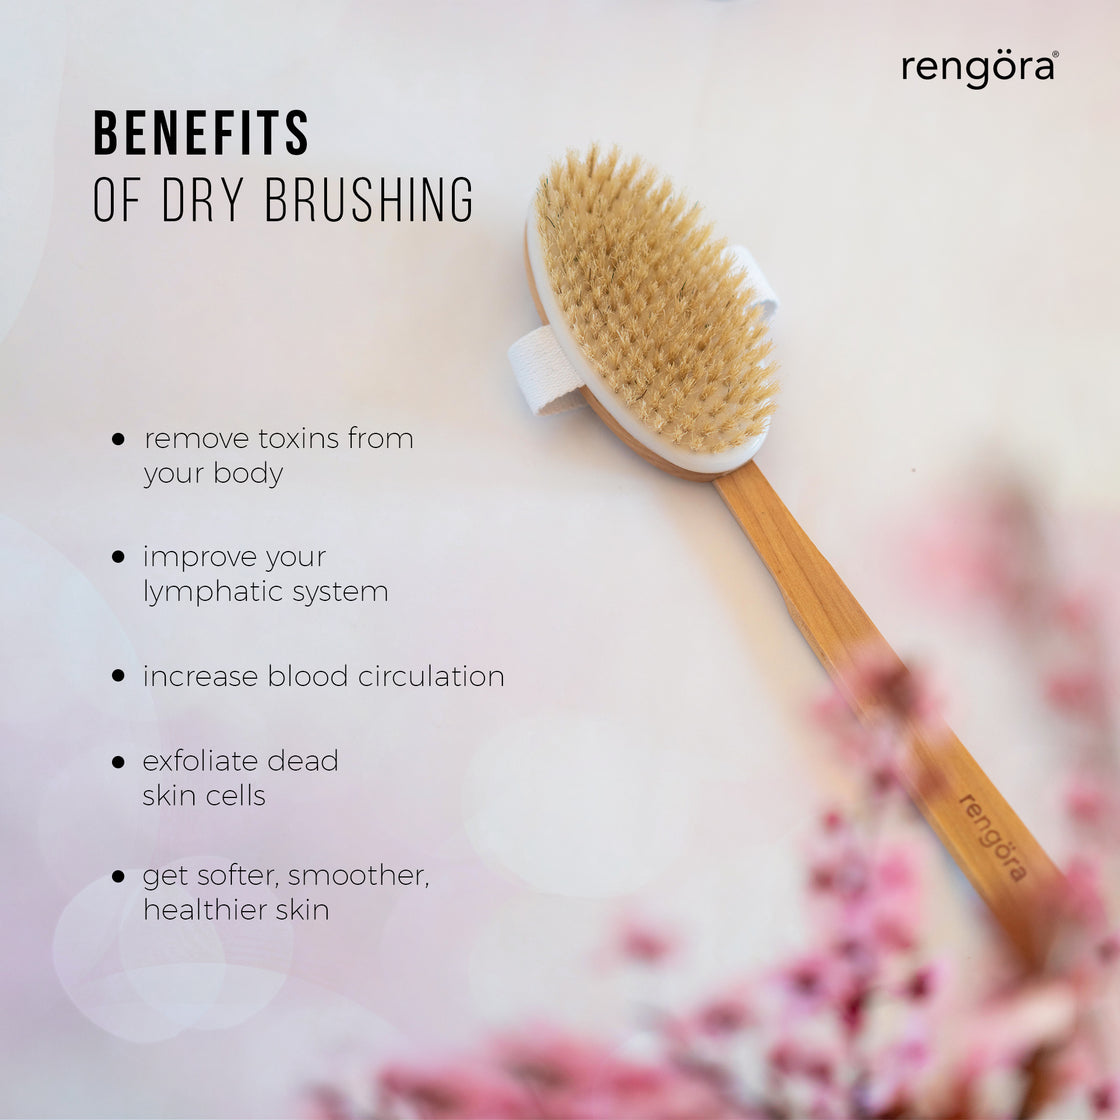 Utilizing the Rengora brush offers numerous advantages, including the elimination of toxins from your body, enhancement of your lymphatic system, improved blood circulation, exfoliation of dead skin cells, and the promotion of softer, smoother, and healthier skin